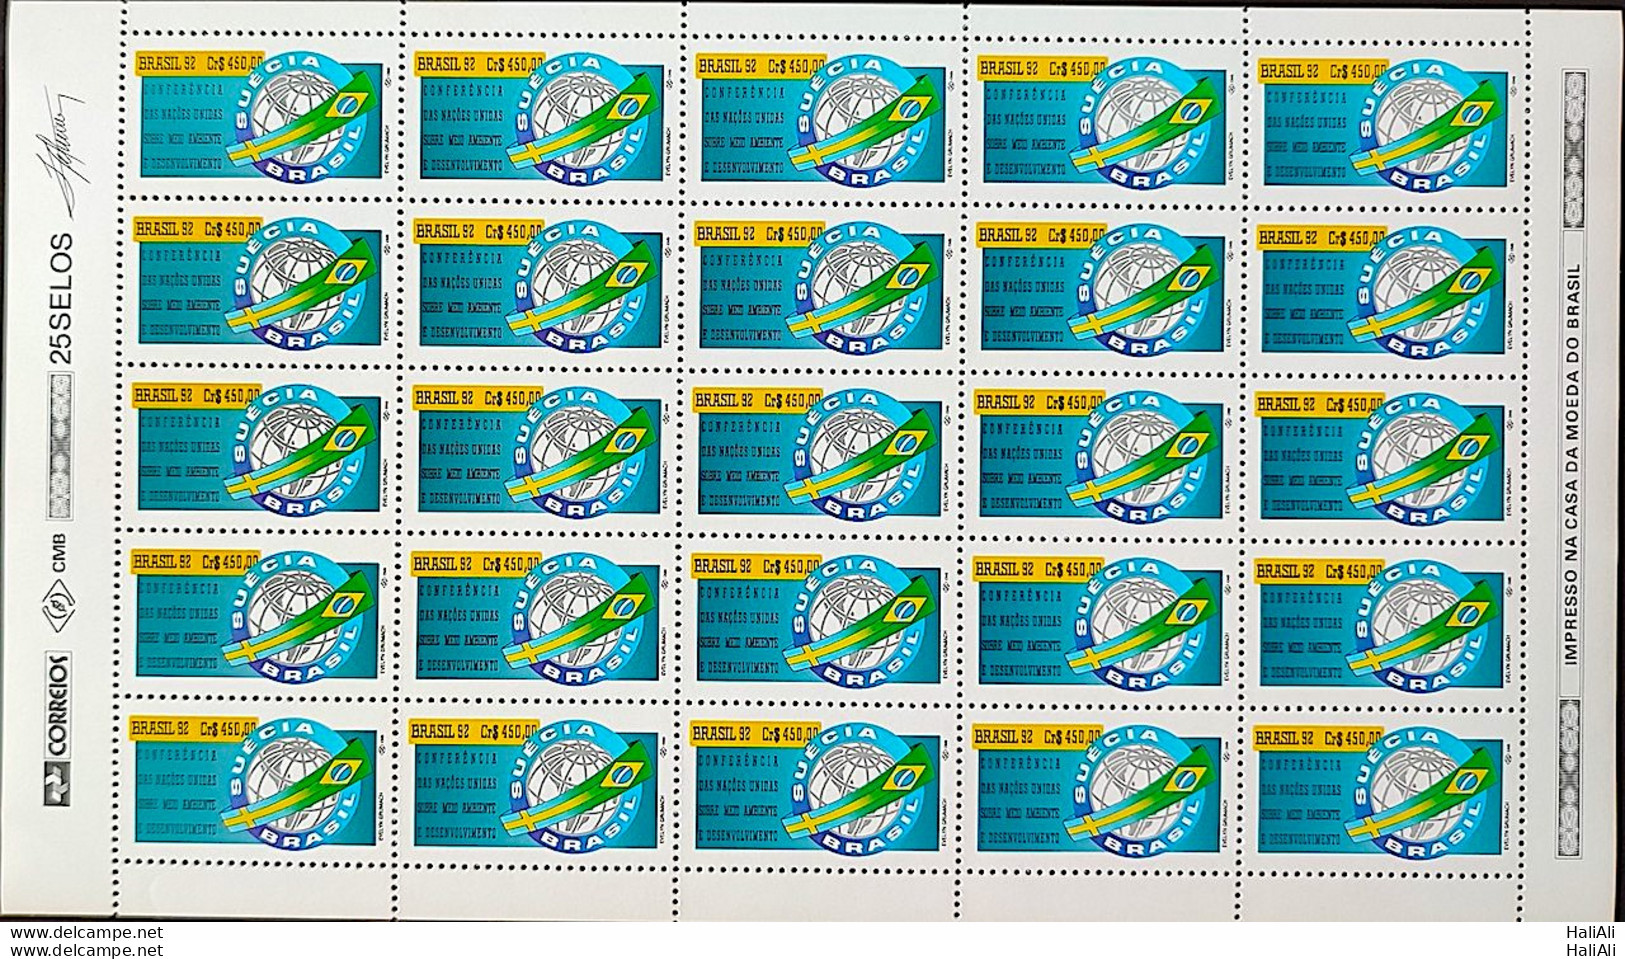 C 1798 Brazil Stamp Conference Eco 92 Rio De Janeiro Sweden Flag Environment 1992 Sheet - Unused Stamps